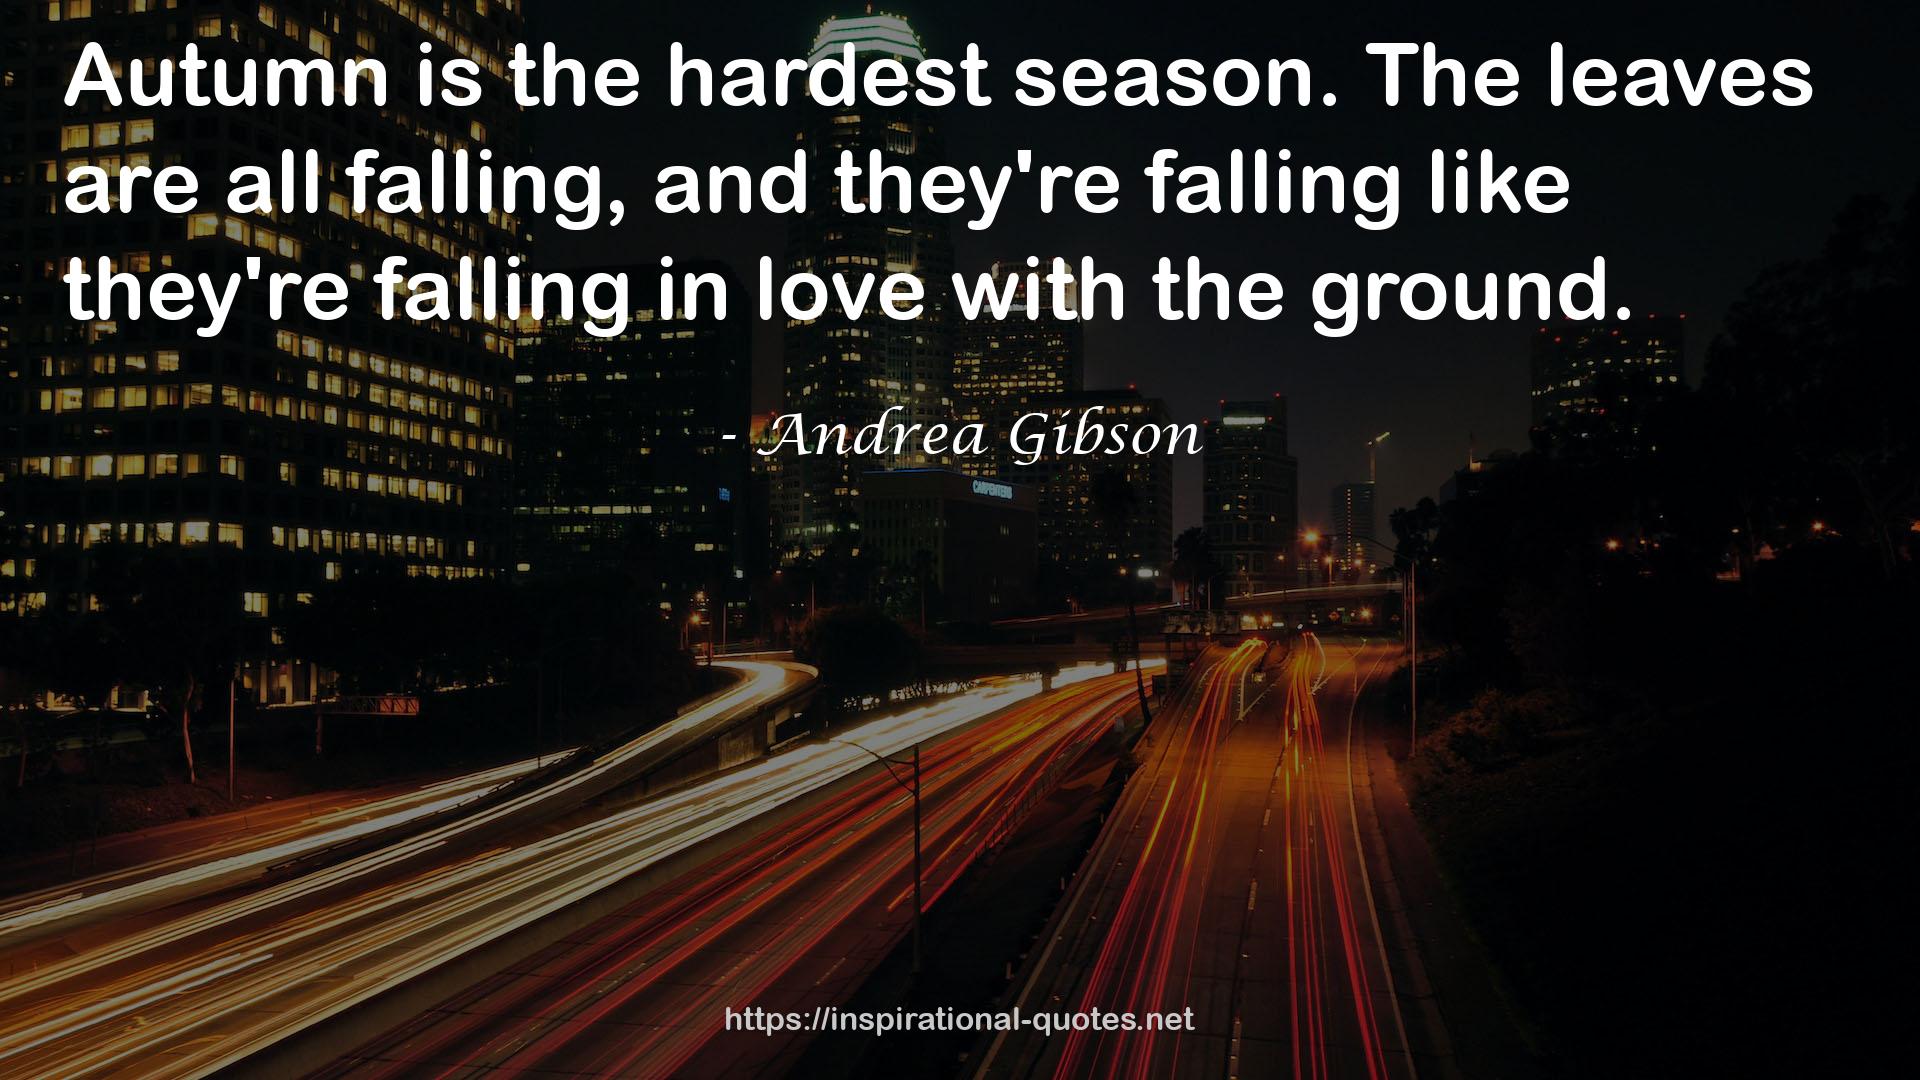 Andrea Gibson QUOTES